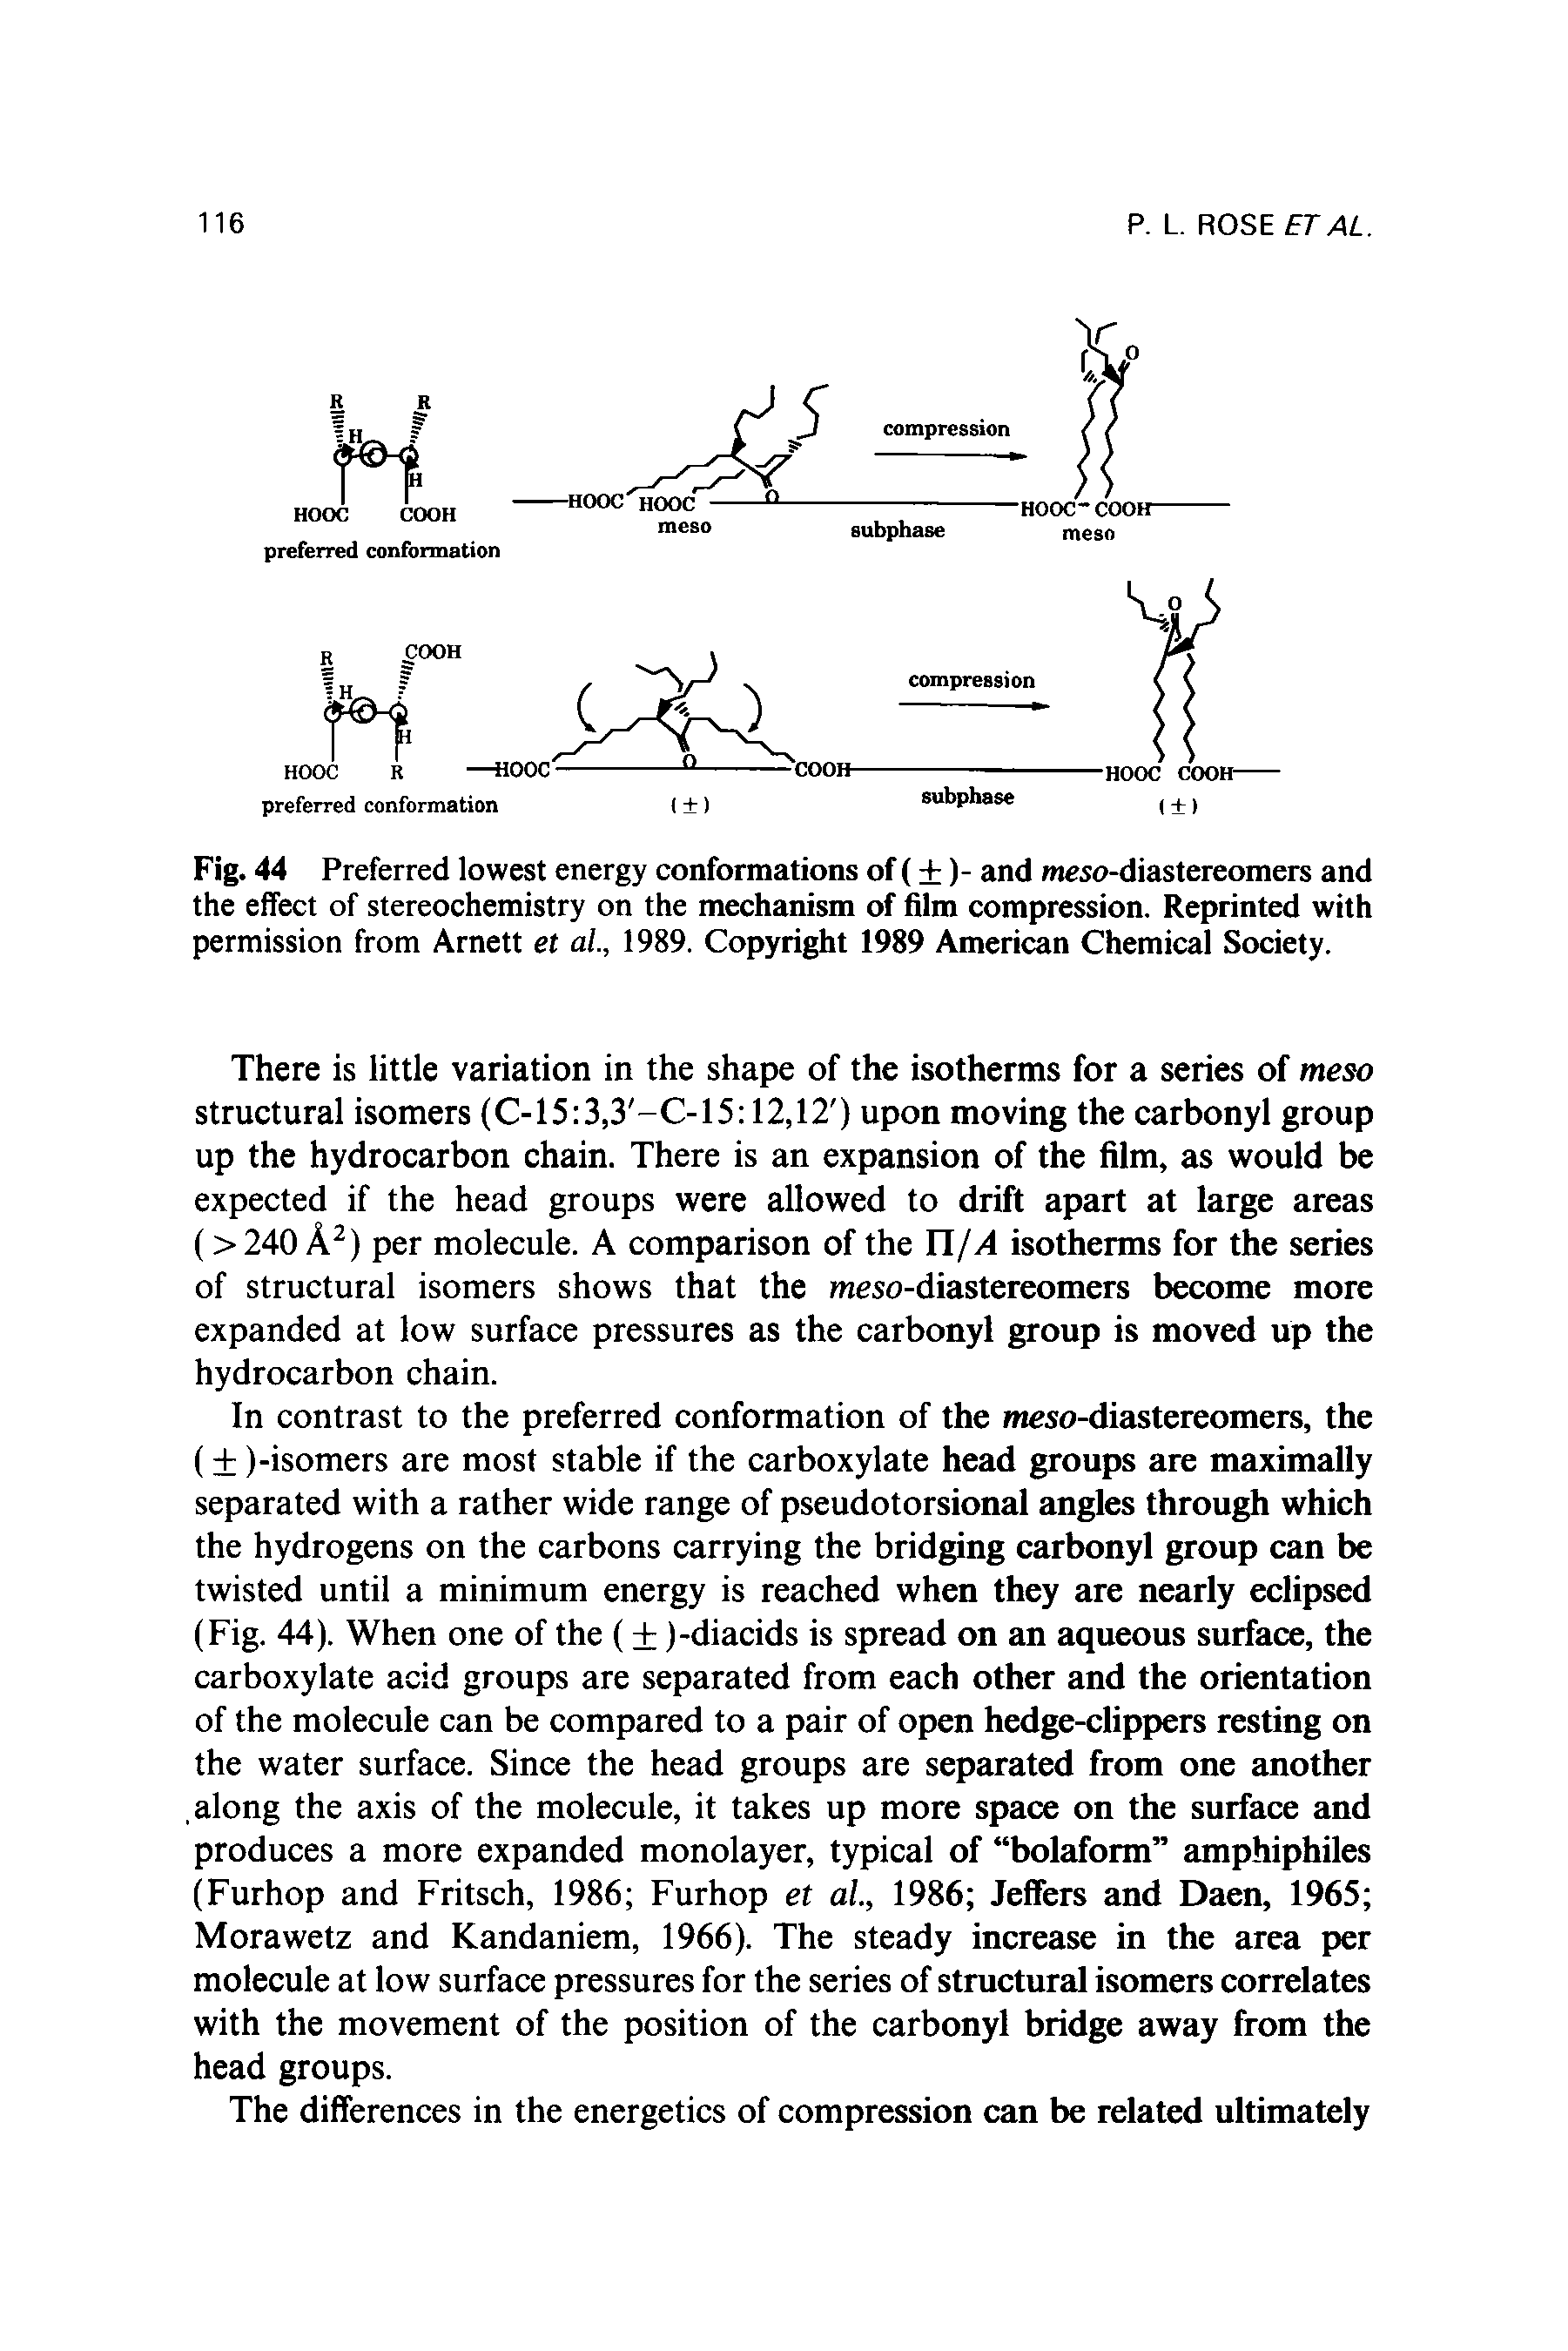 Fig. 44 Preferred lowest energy conformations of (+)- and meso-diastereomers and the effect of stereochemistry on the mechanism of film compression. Reprinted with permission from Arnett et al., 1989. Copyright 1989 American Chemical Society.